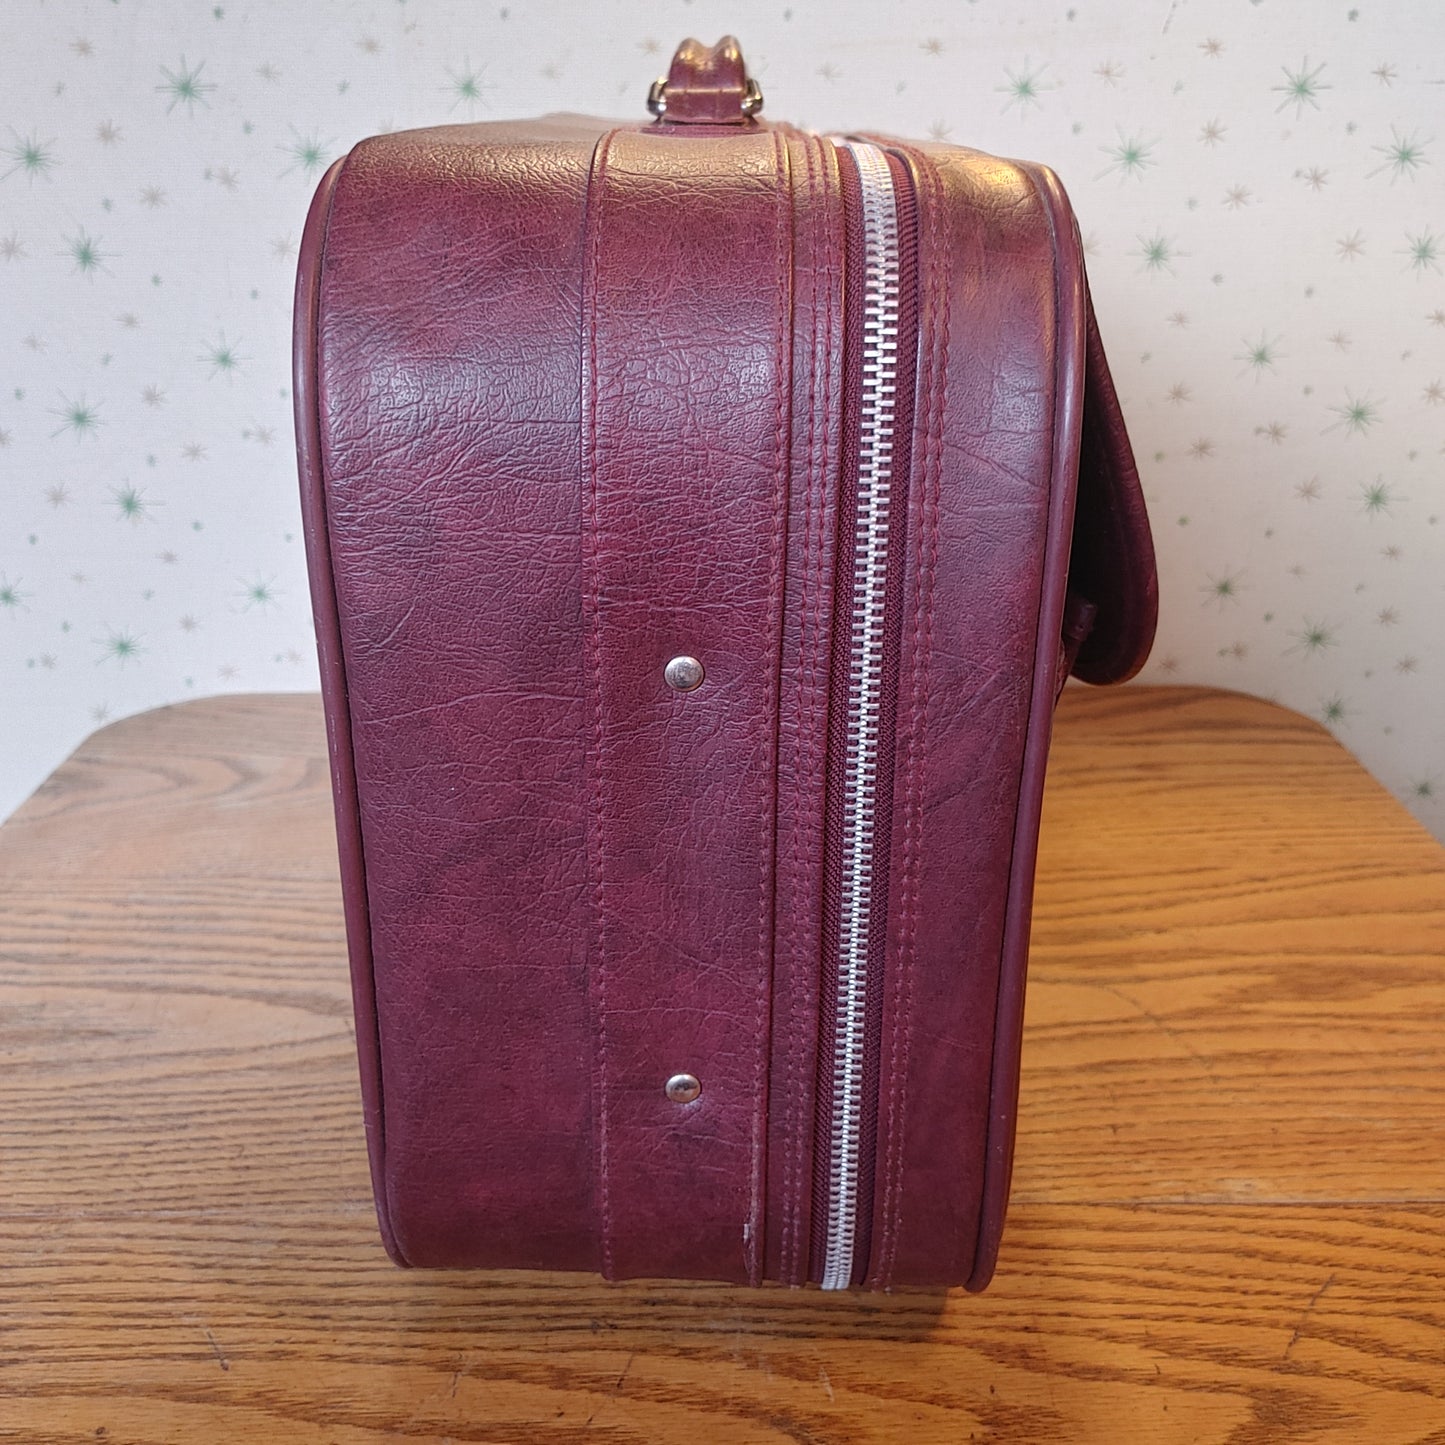 A Case For Suits! Vintage American Tourister Soft-side Suit Case 1986 Red Burgundy